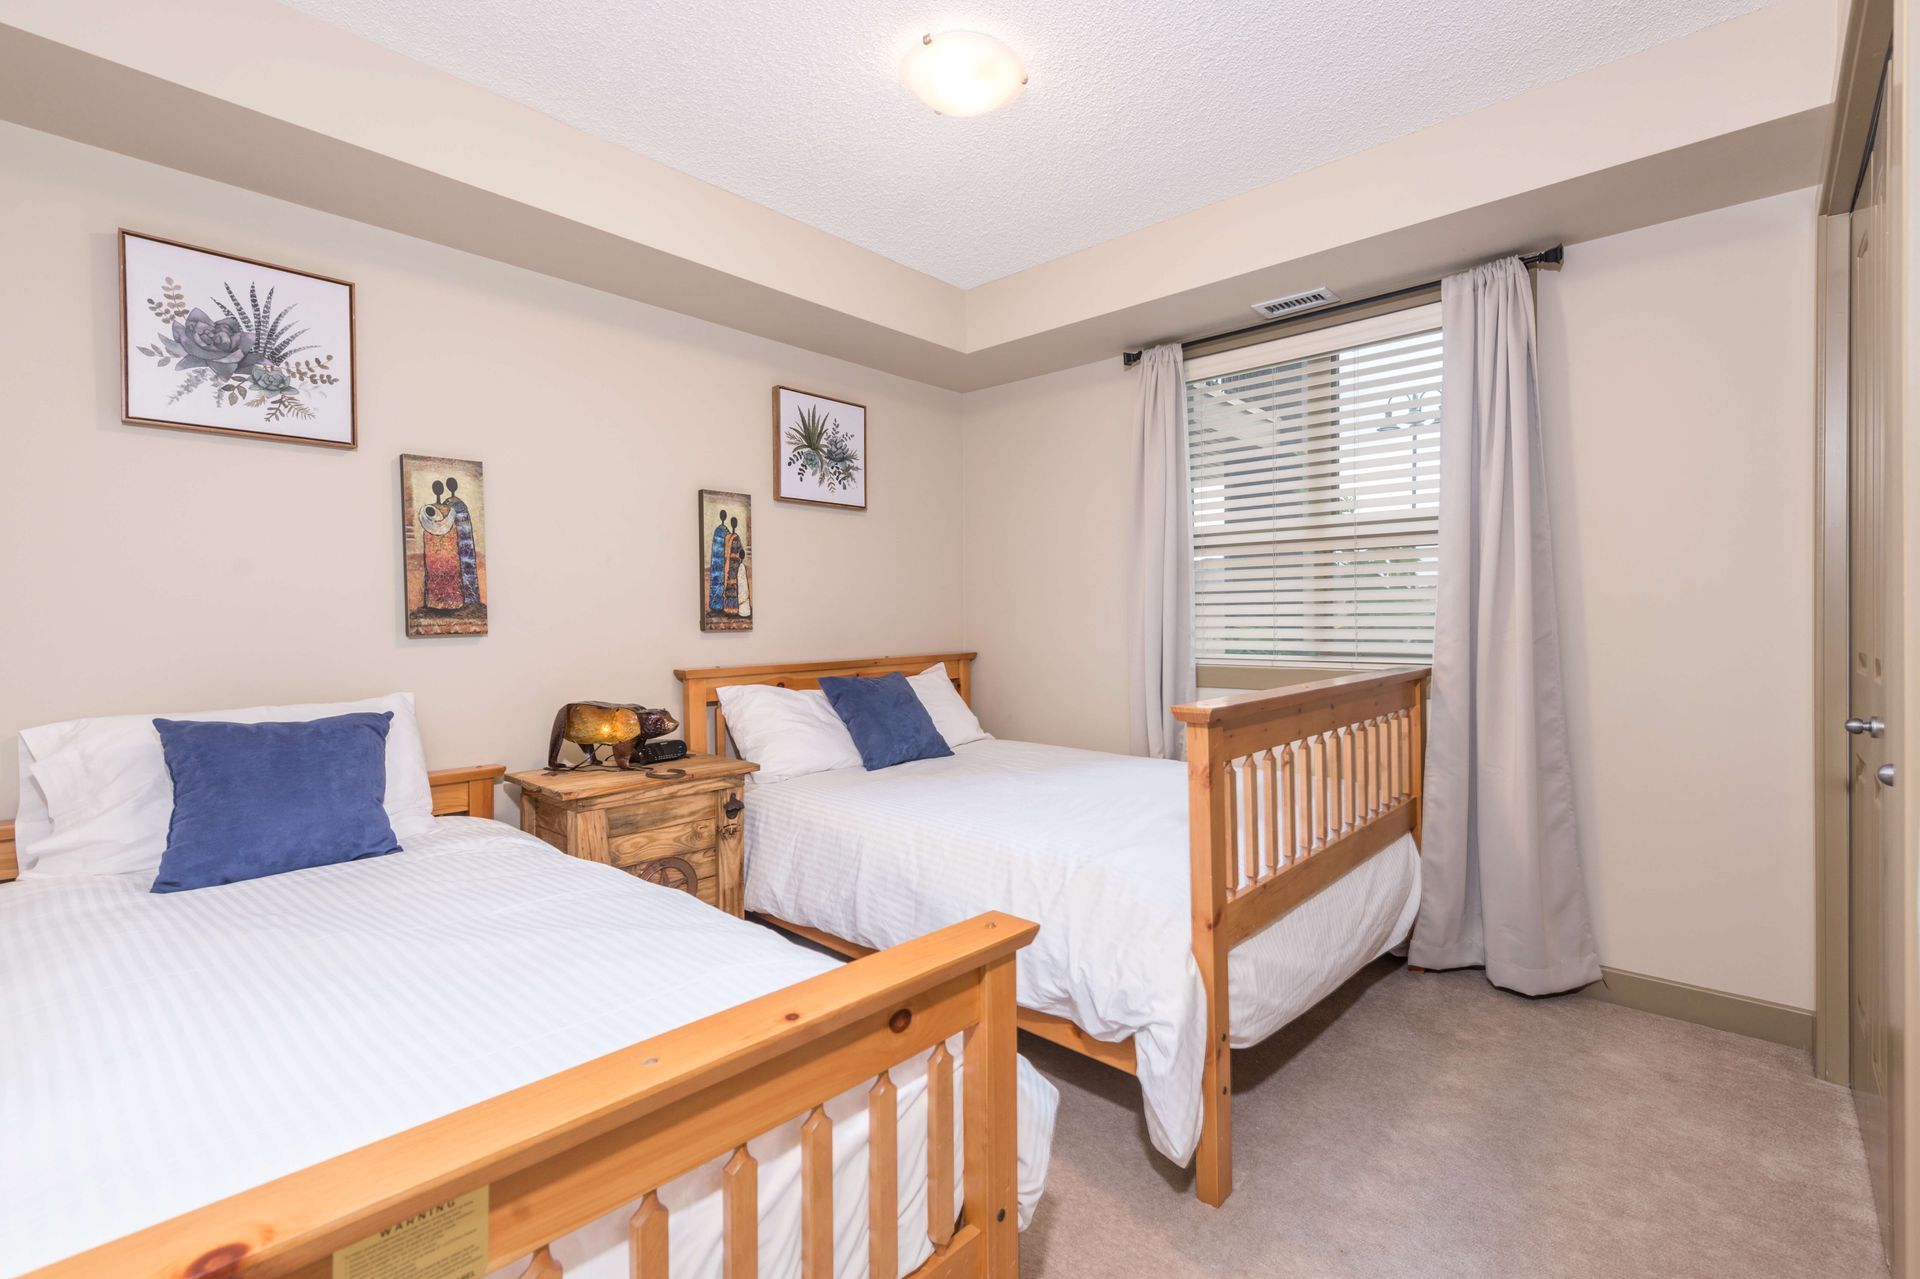 Second bedroom at the Lake Windermere Pointe Condos in Invermere, BC managed by Aisling Baile Property Management